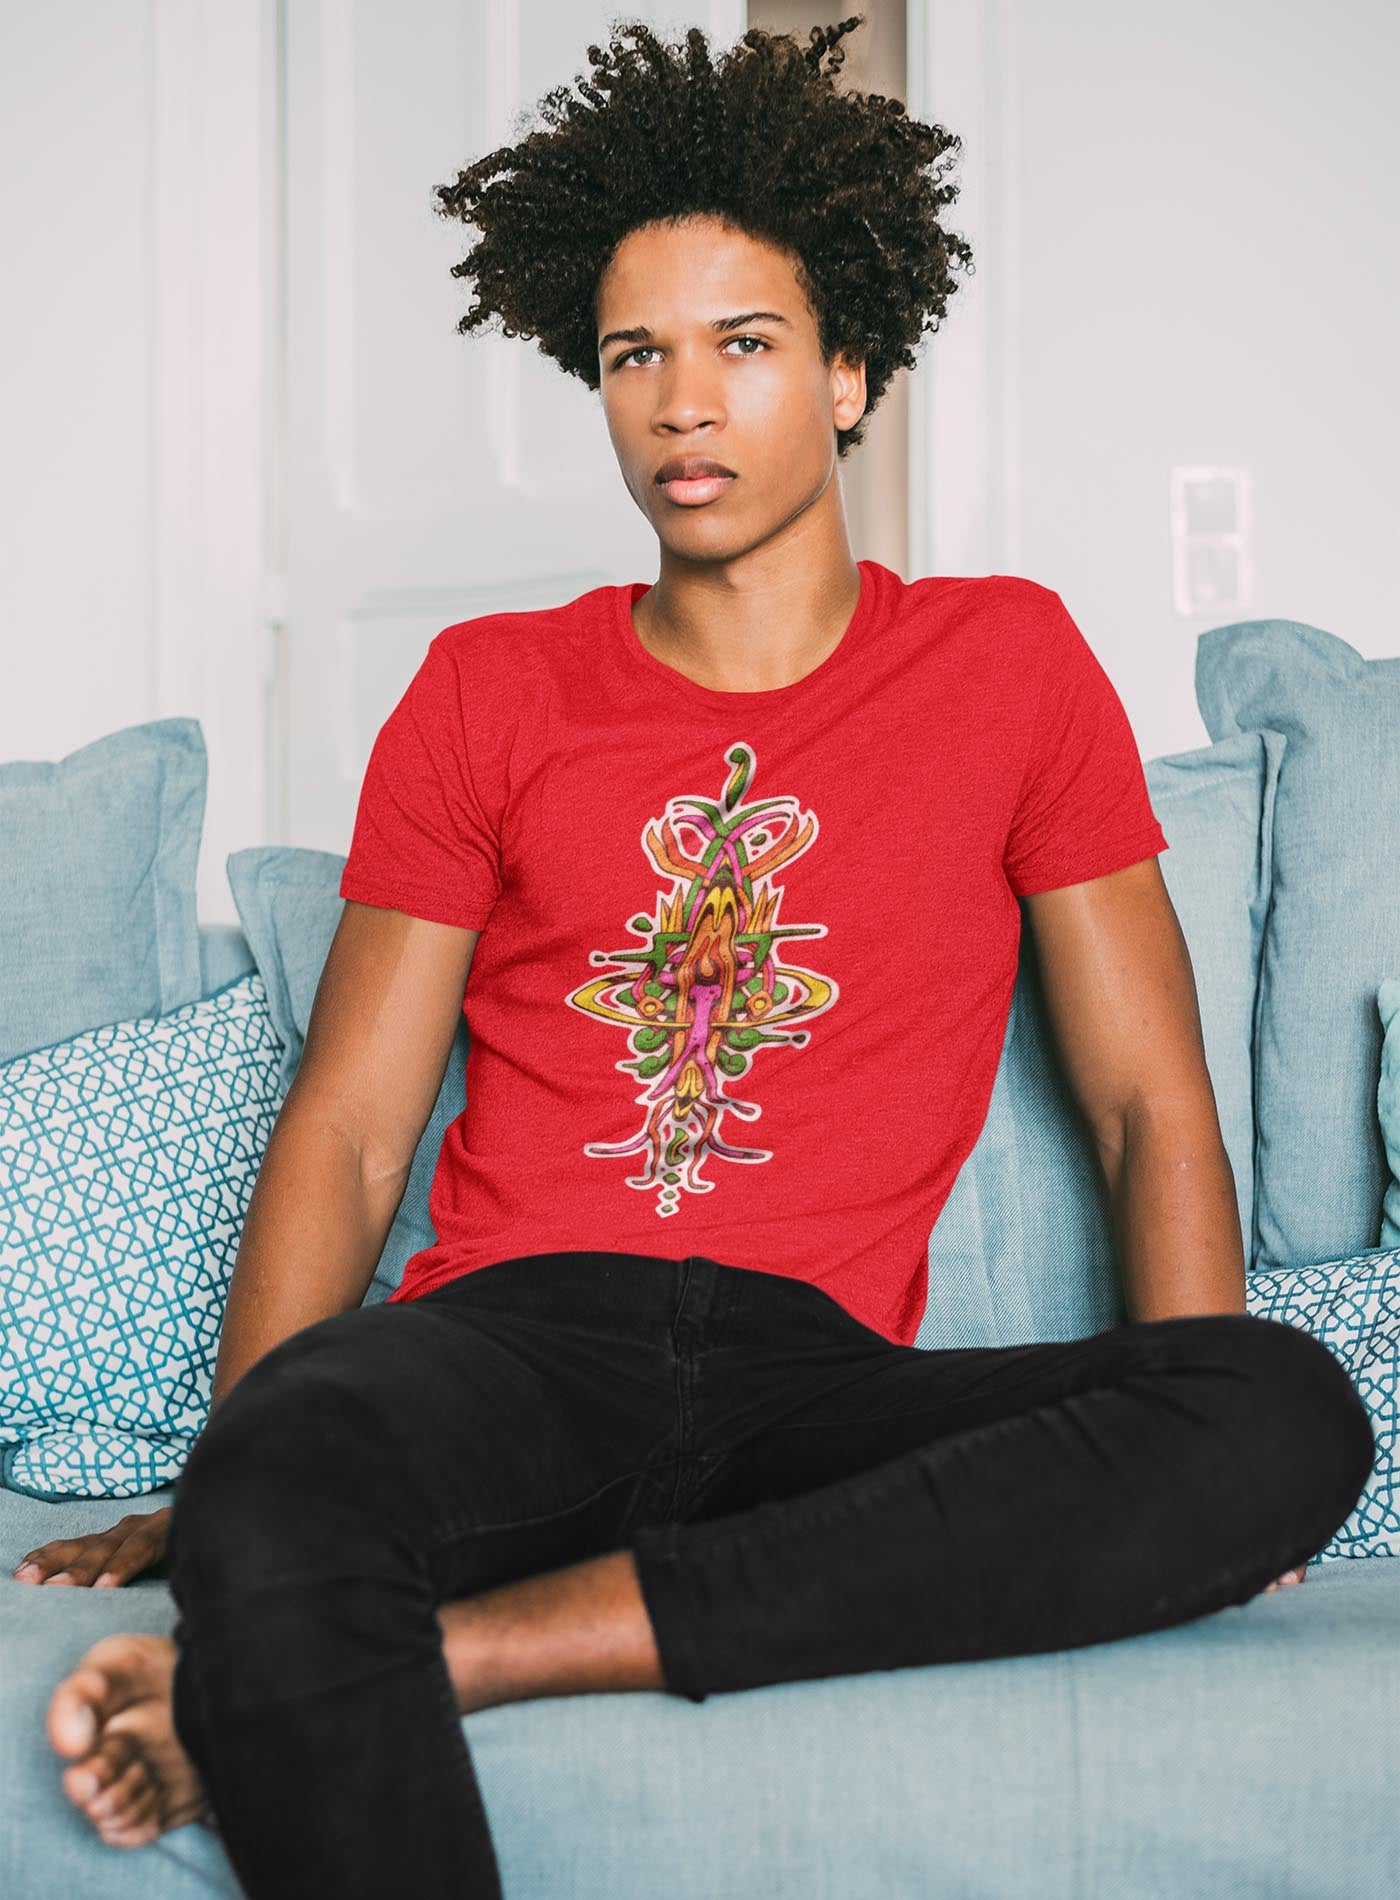 man modeling a Heather red unisex t-shirt featuring a front print of the Toltec-Aztec hummingbird deity illustrated by G.M. Meave.